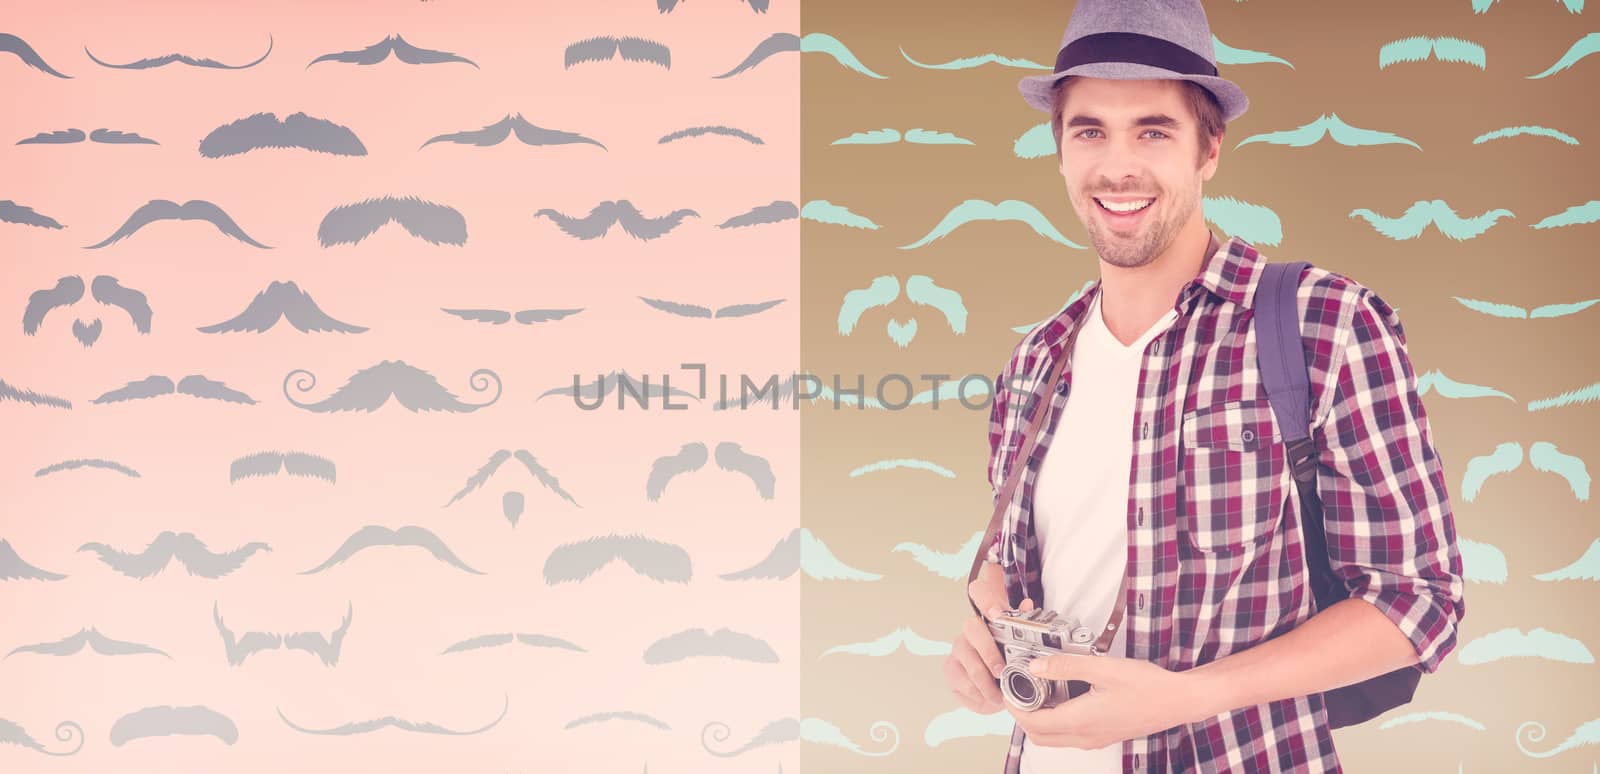 Portrait of man smiling while holding camera against composite image of mustaches